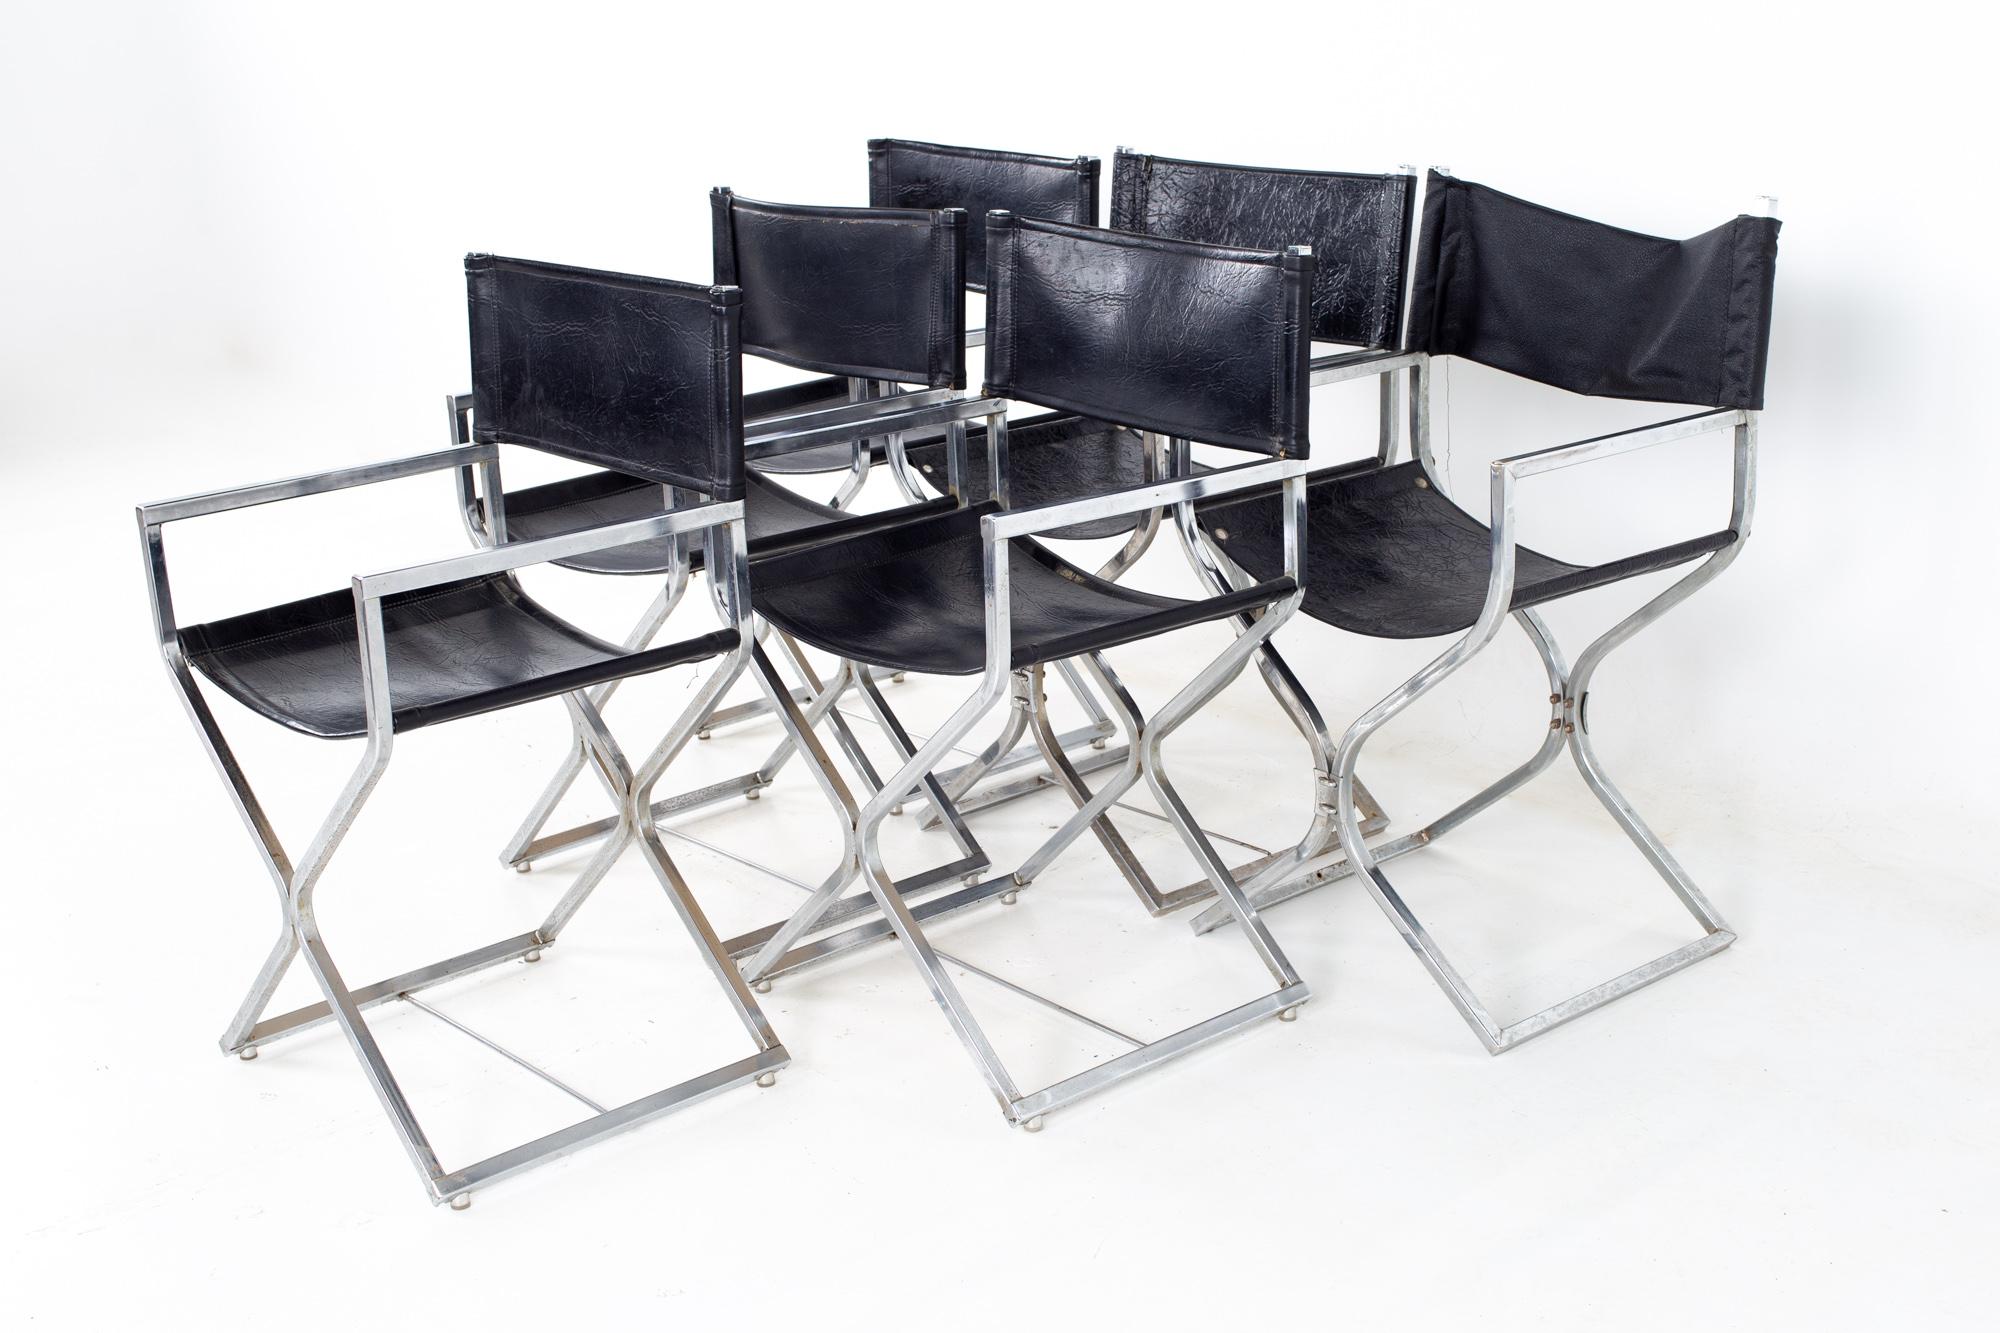 Alessandro Albrizzi style mid century naugahyde and chrome directors chairs - set of 6.
Each chair measures: 19 wide x 16.75 deep x 32 high, with a seat height of 18.5 inches and arm height of 24.25 inches high

All pieces of furniture can be had